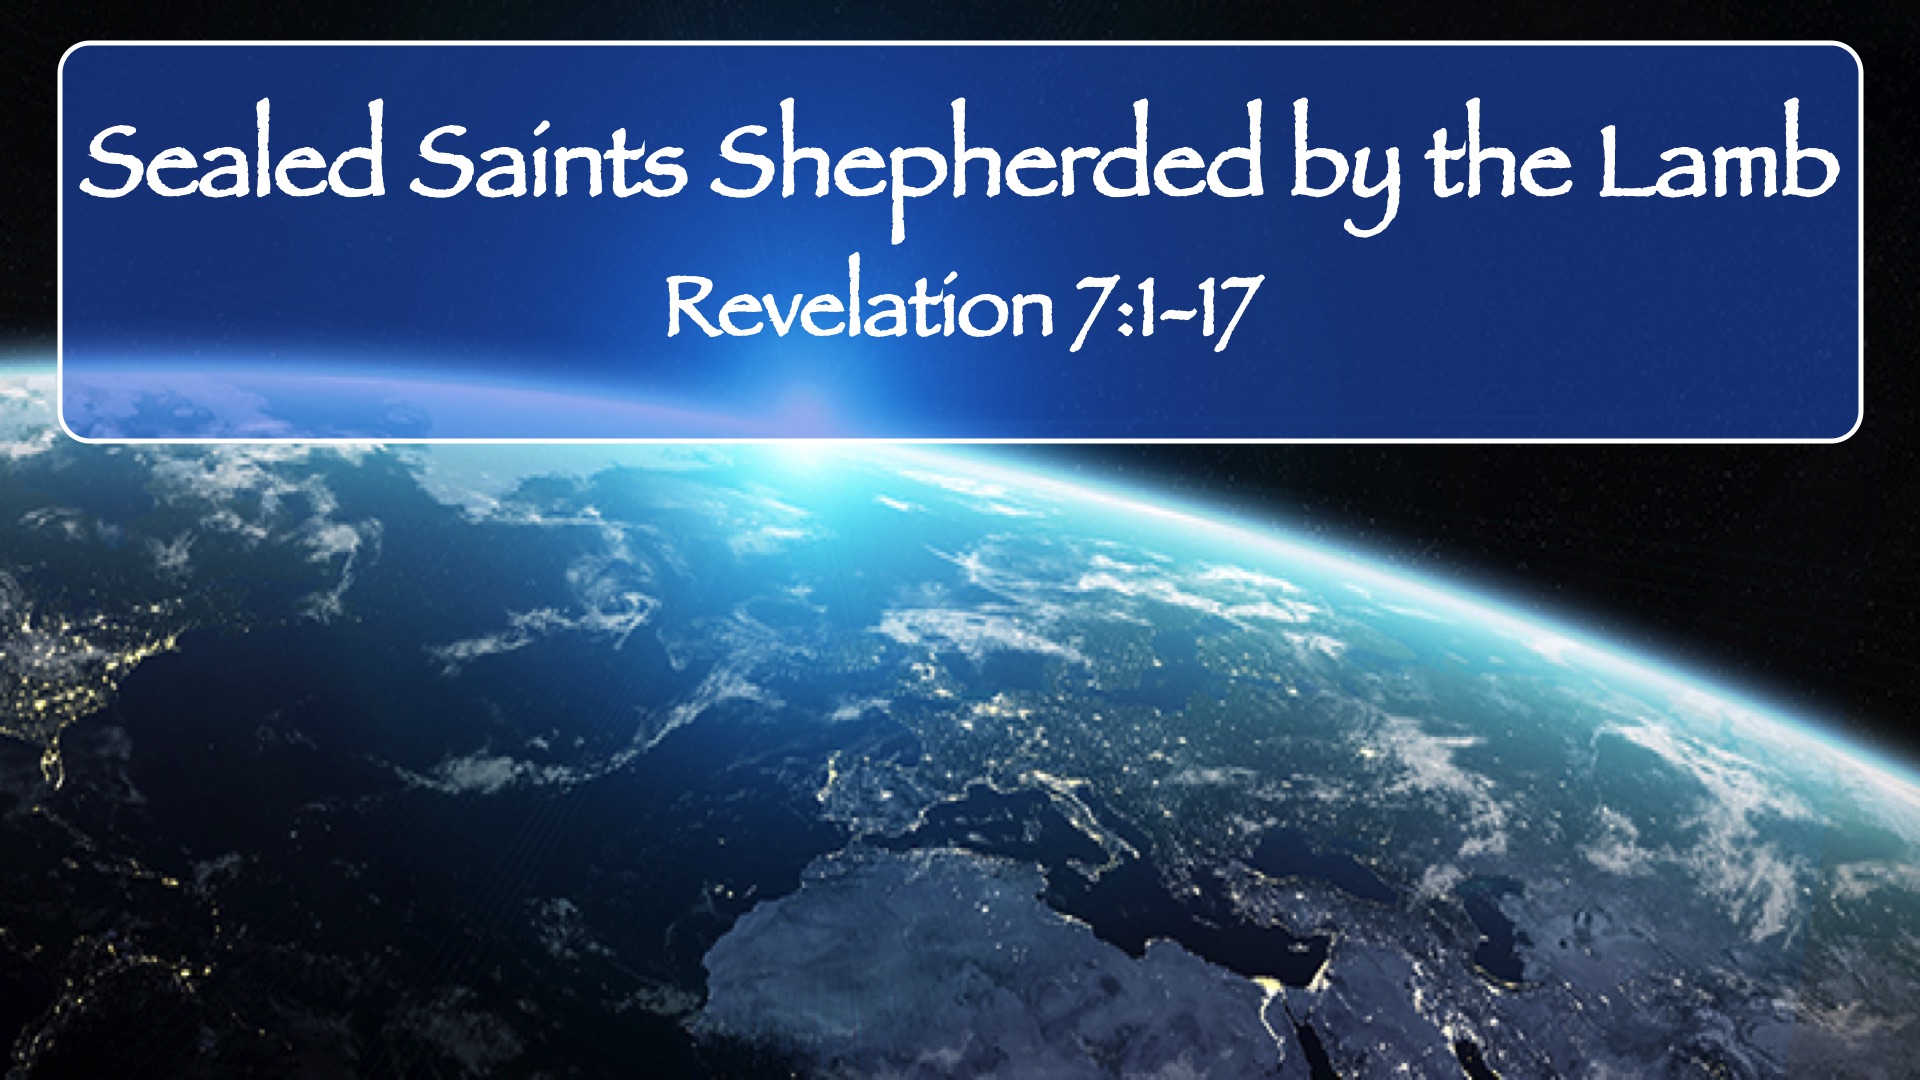 “The Book of Revelation: Sealed Saints Shepherded by the Lamb”